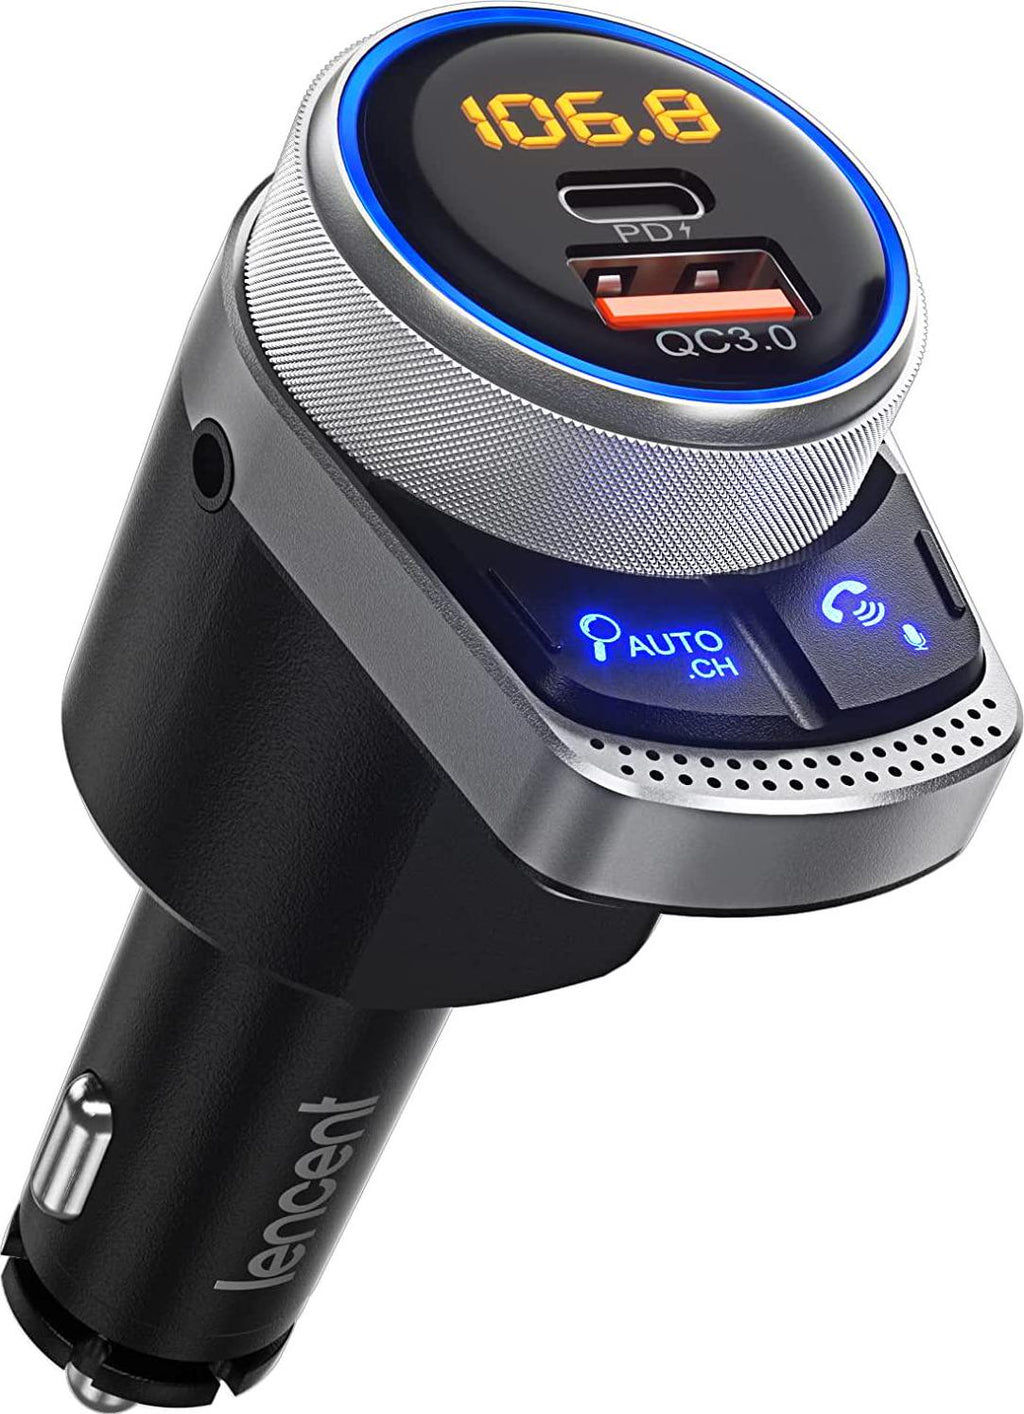 LENCENT FM Transmitter Bluetooth in-car , Auto-Tune Frequency Auto Sea